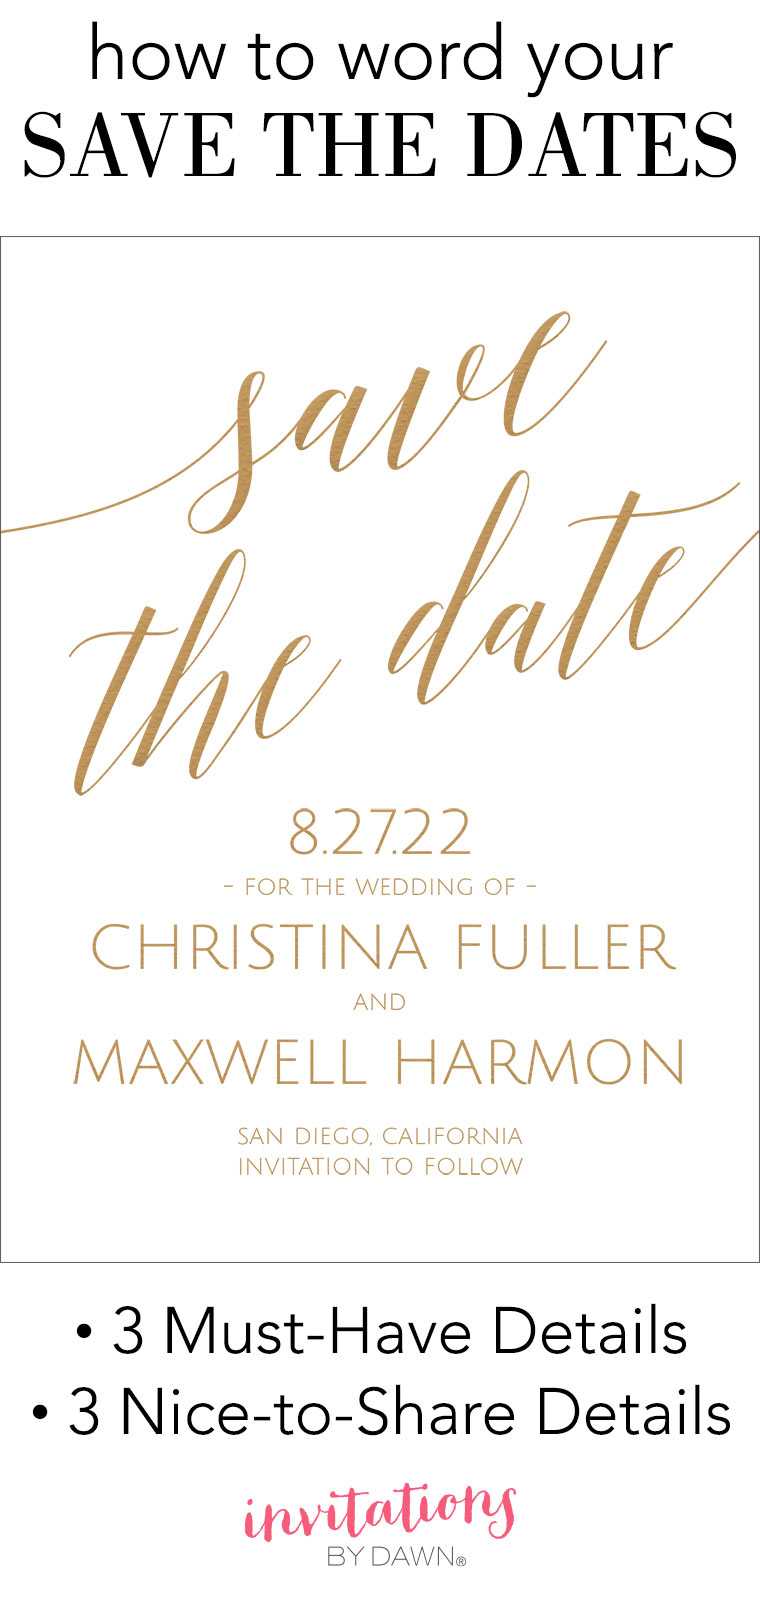 Save The Date Wording | Invitationsdawn With Save The Date Template Word